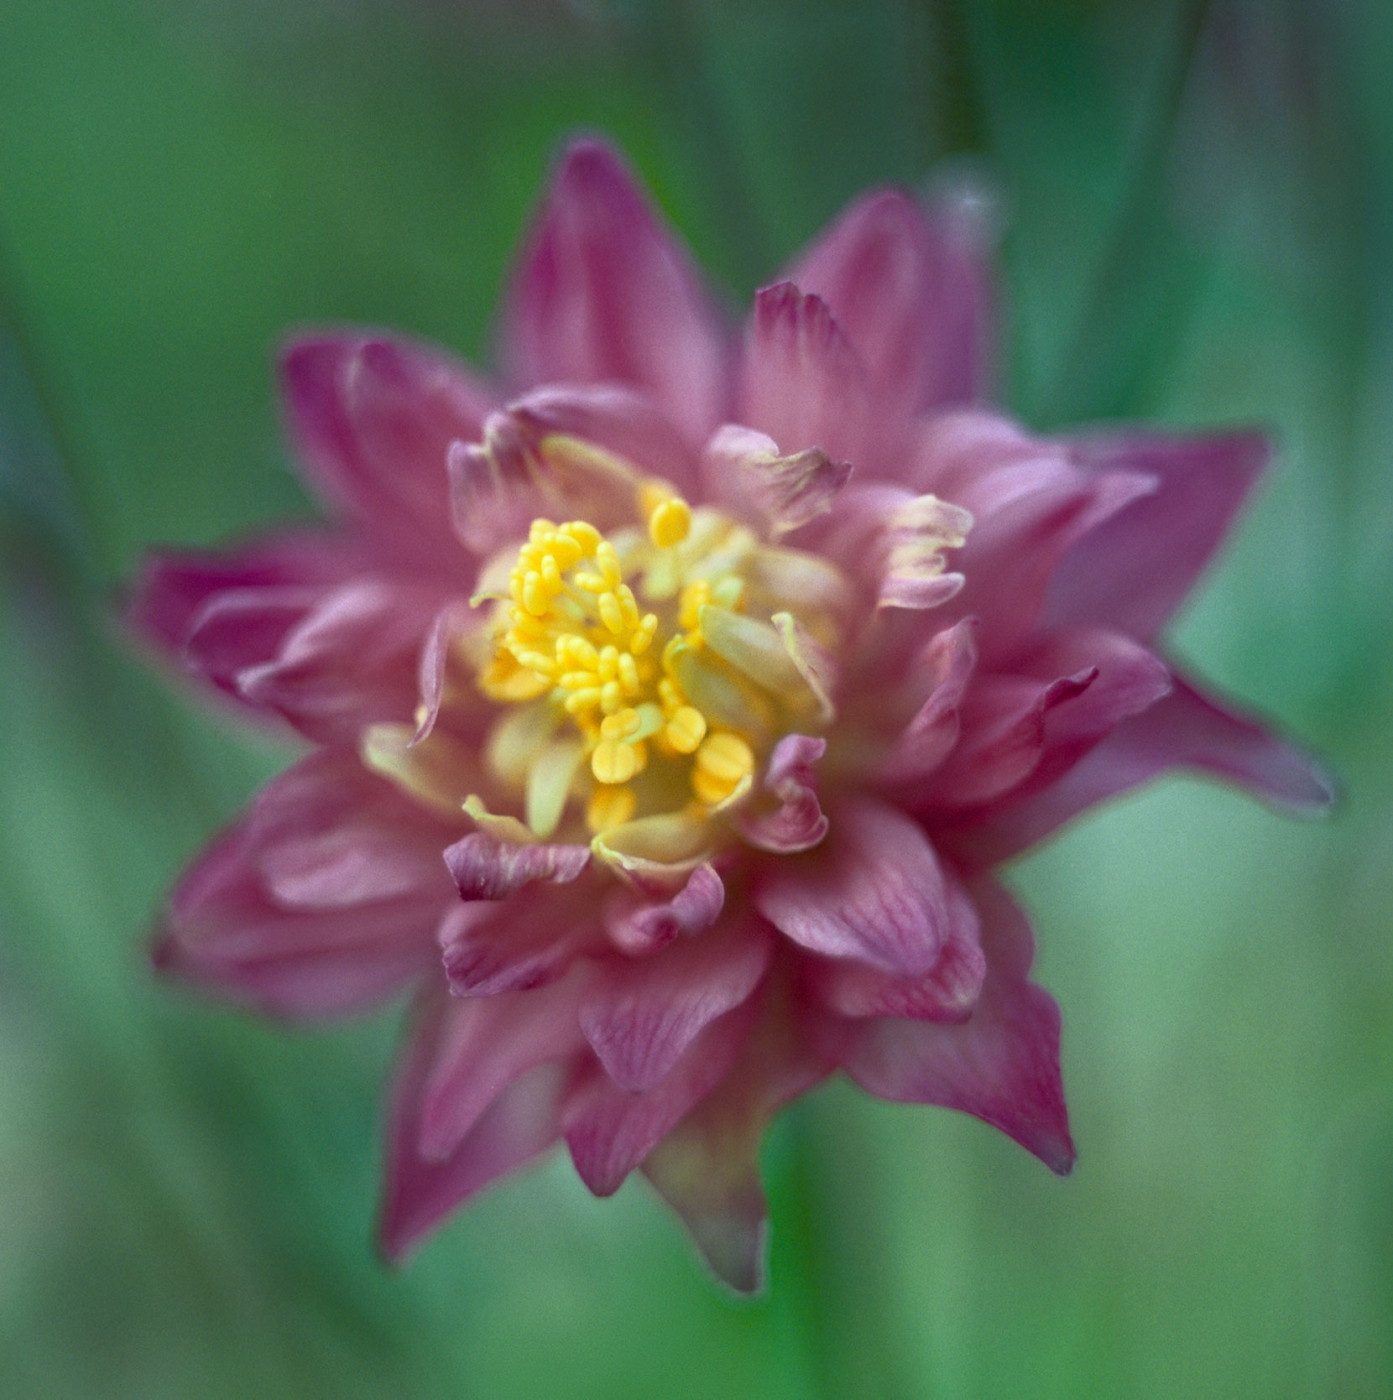 Aquilegia Vulgaris from last year - there's nothing vulgaris about this wonderful little flower, just an inch wide.